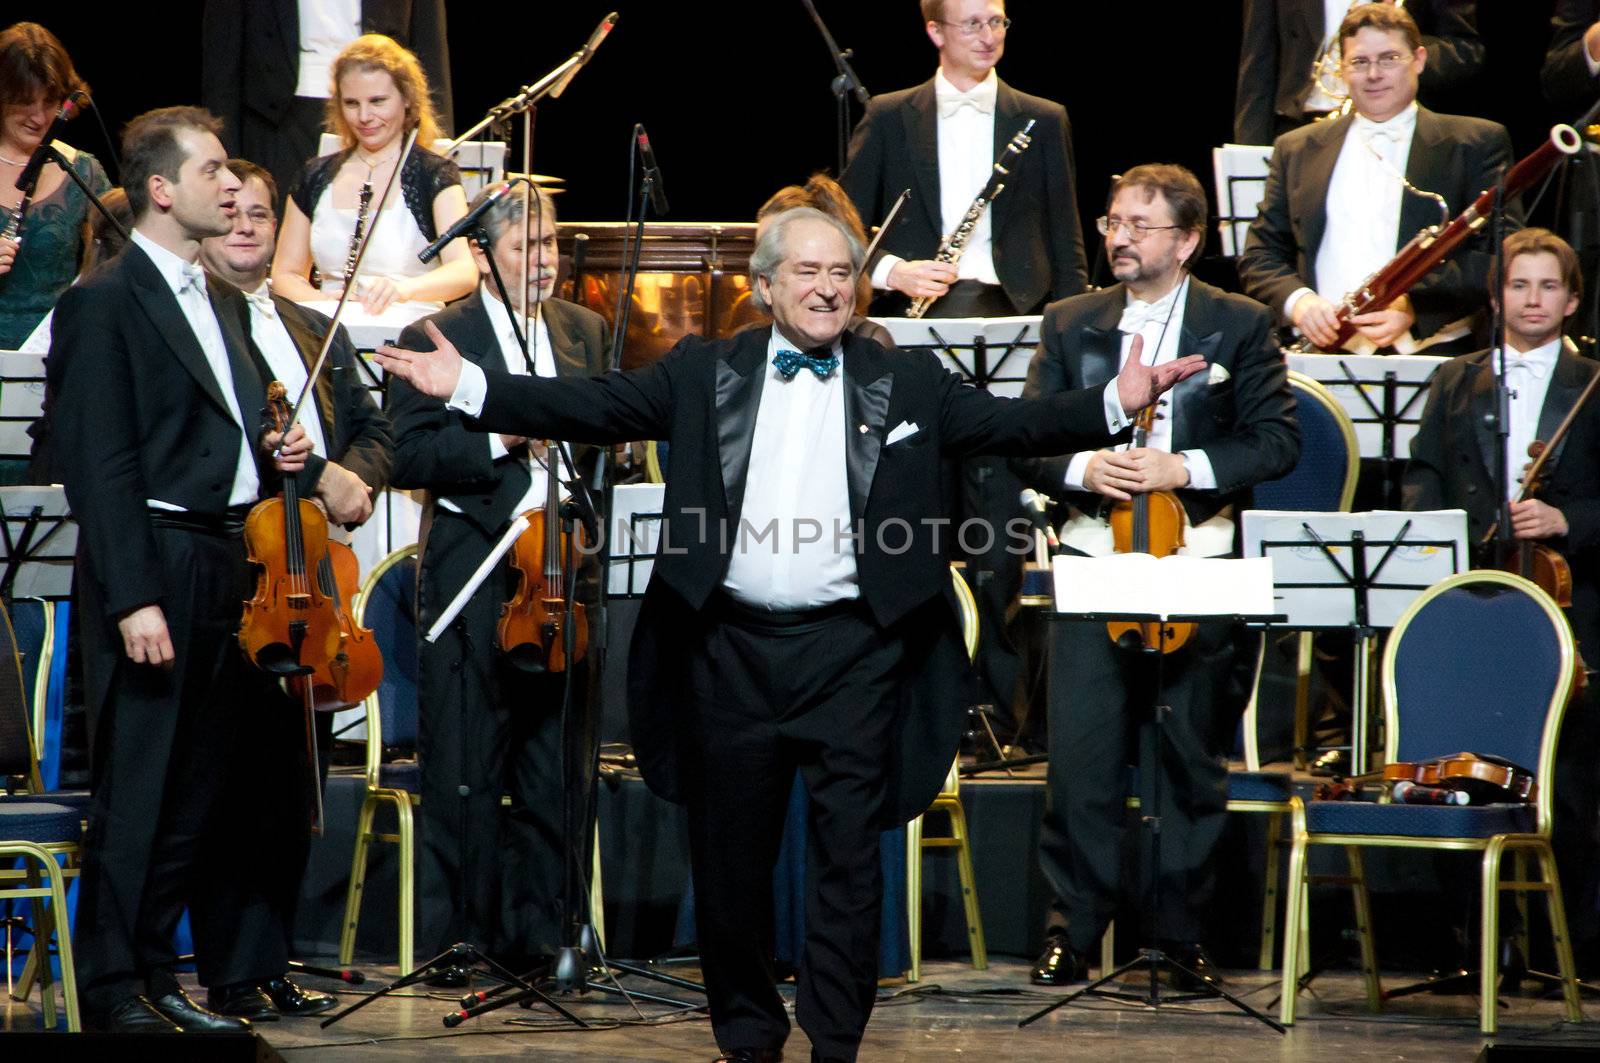 Peter Guth and Strauss Festival Orchestra Vienna in concert Crocus City Hall. 
Moscow - November 17, 2010